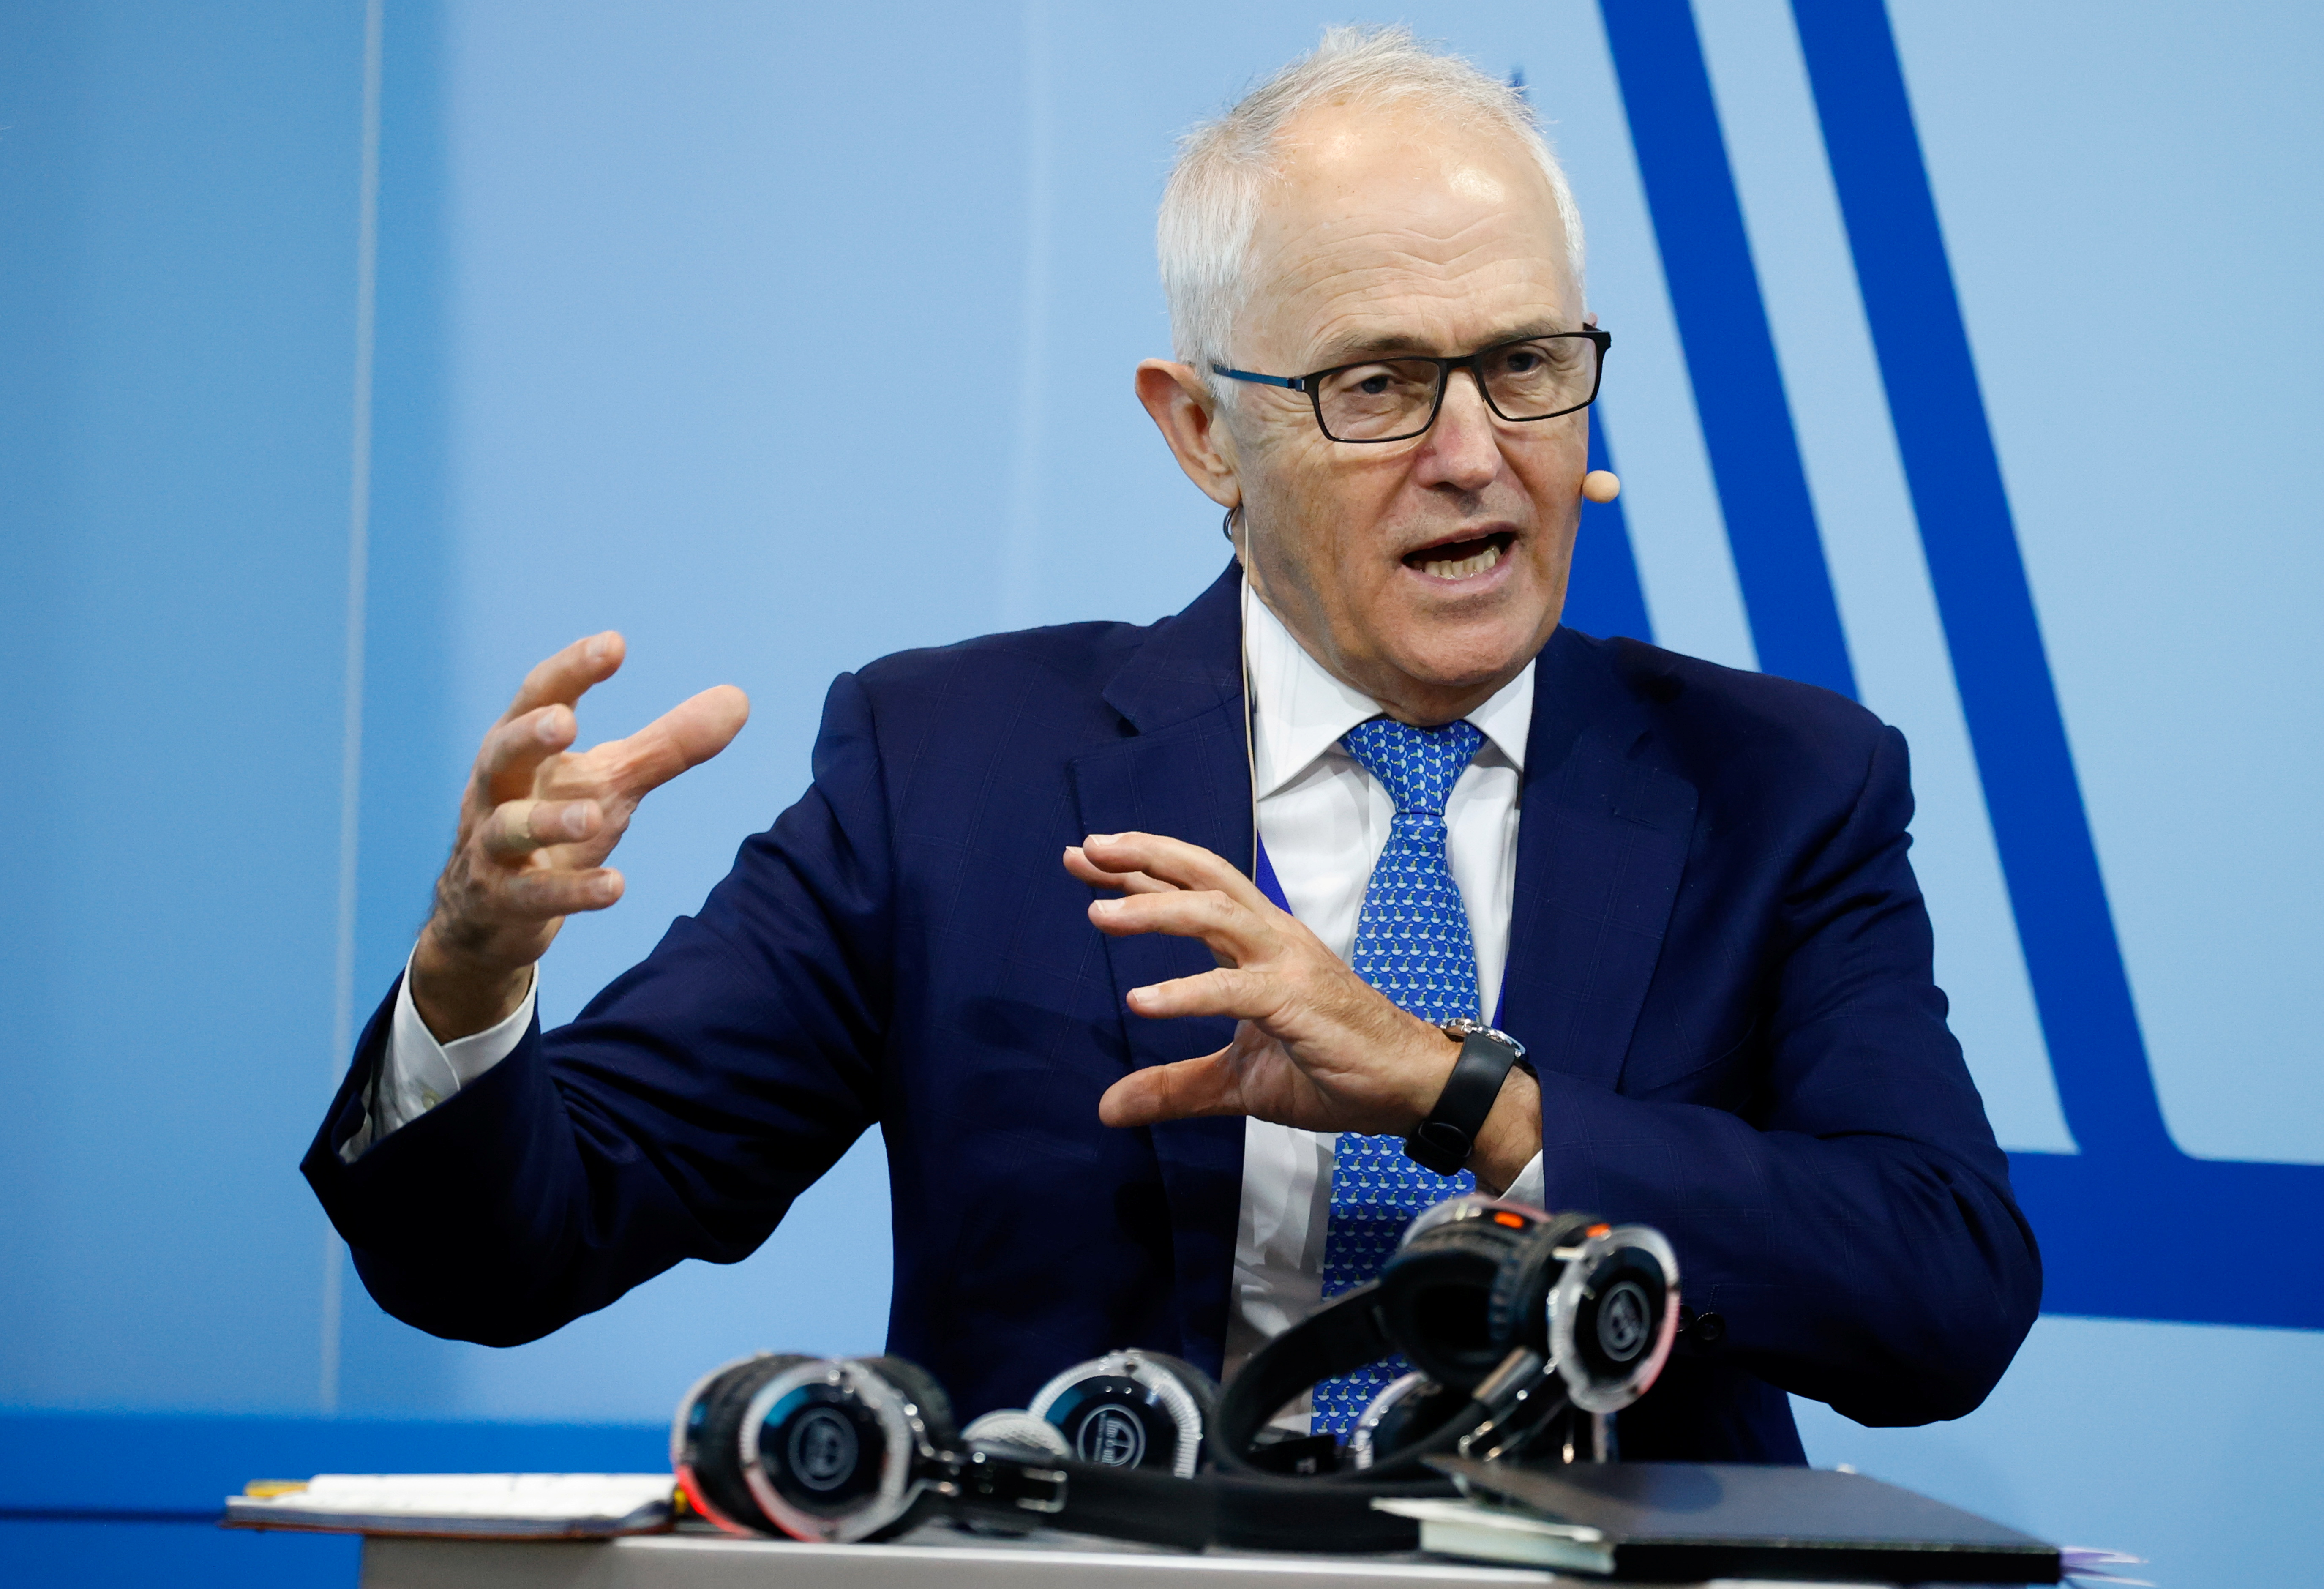 Former Australian Prime Minister Malcolm Turnbull speaks during the UN Climate Change Conference (COP26), in Glasgow, Scotland, Britain, November 4, 2021. REUTERS/Phil Noble